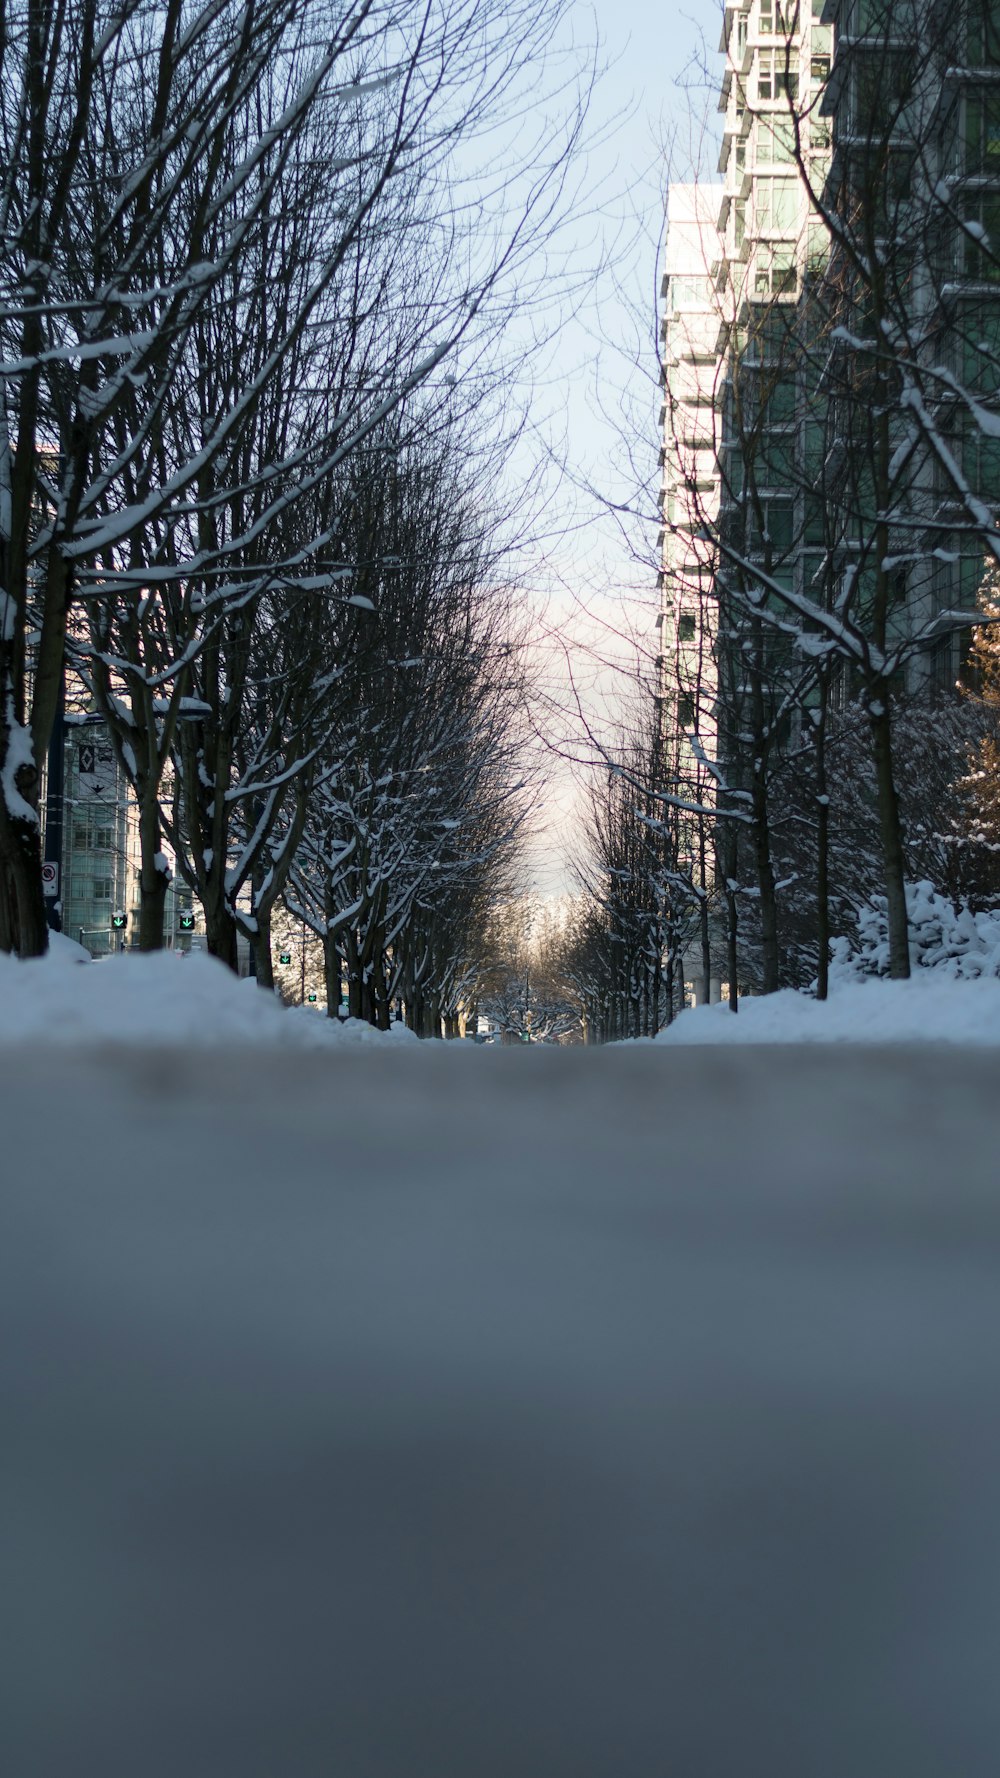 a snowy street lined with tall buildings and trees